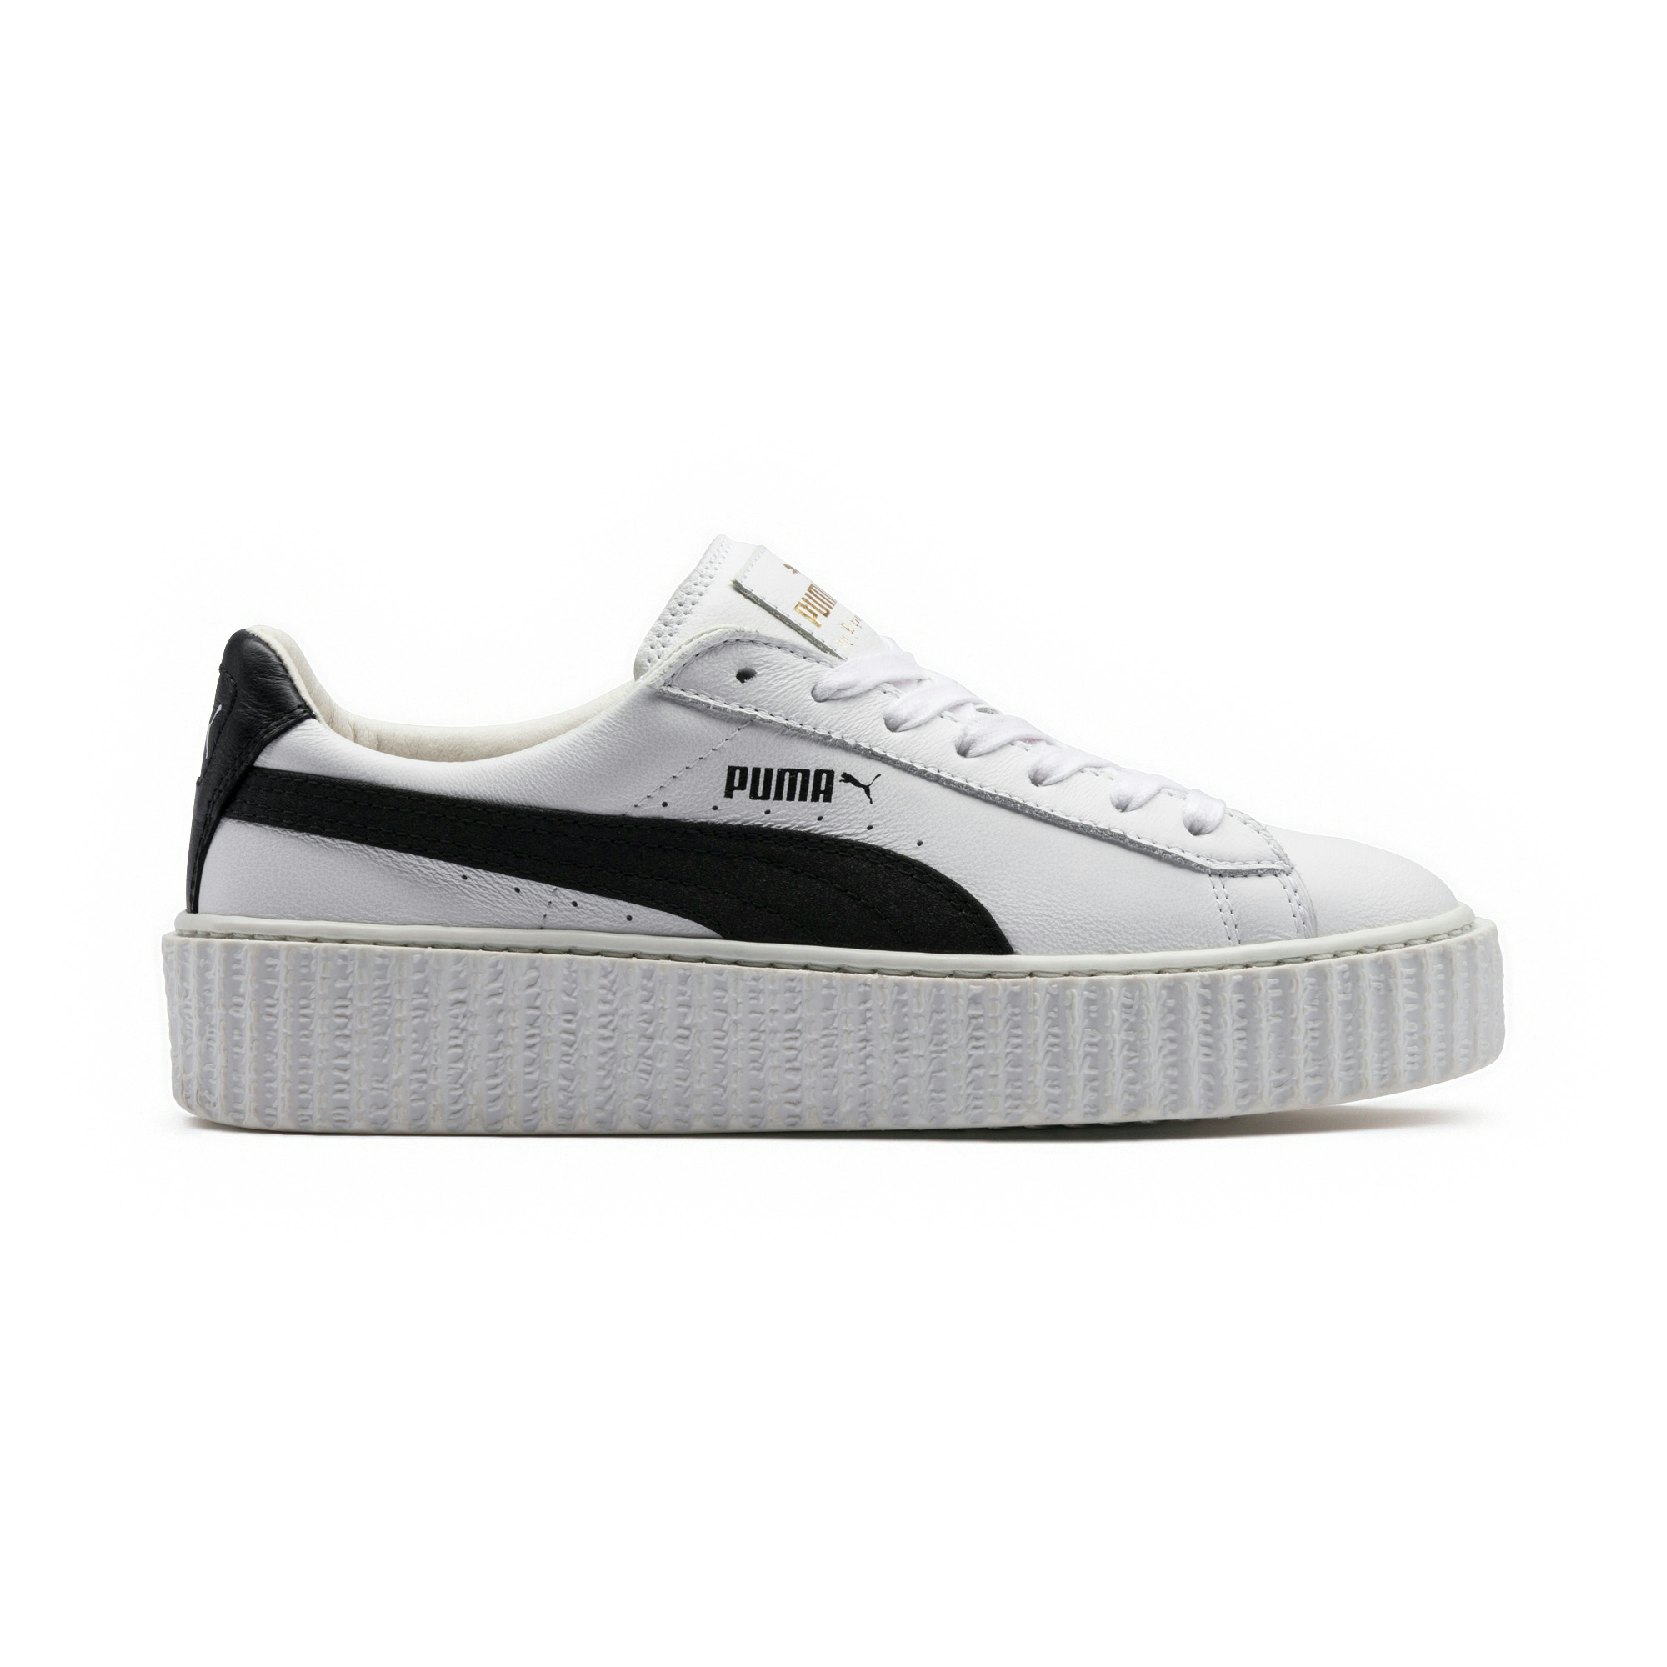 are the puma creepers true to size